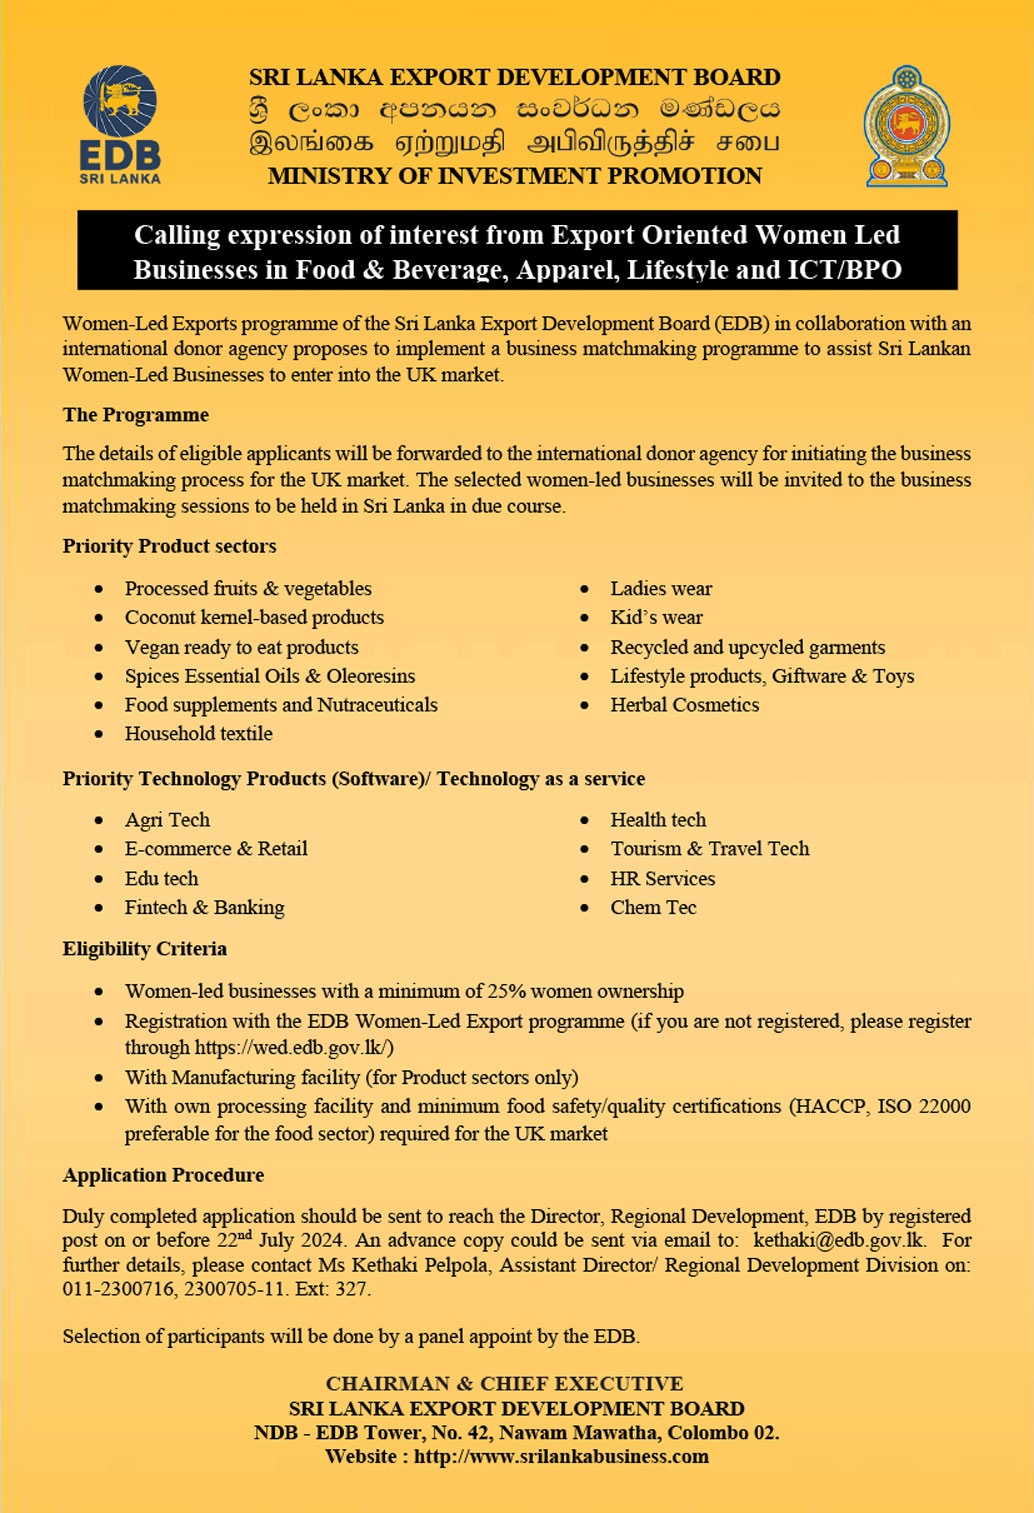 Calling expression of interest from Export Oriented Women Led Businesses in Food & Beverage, Apparel, Lifestyle and ICT/BPO sectors